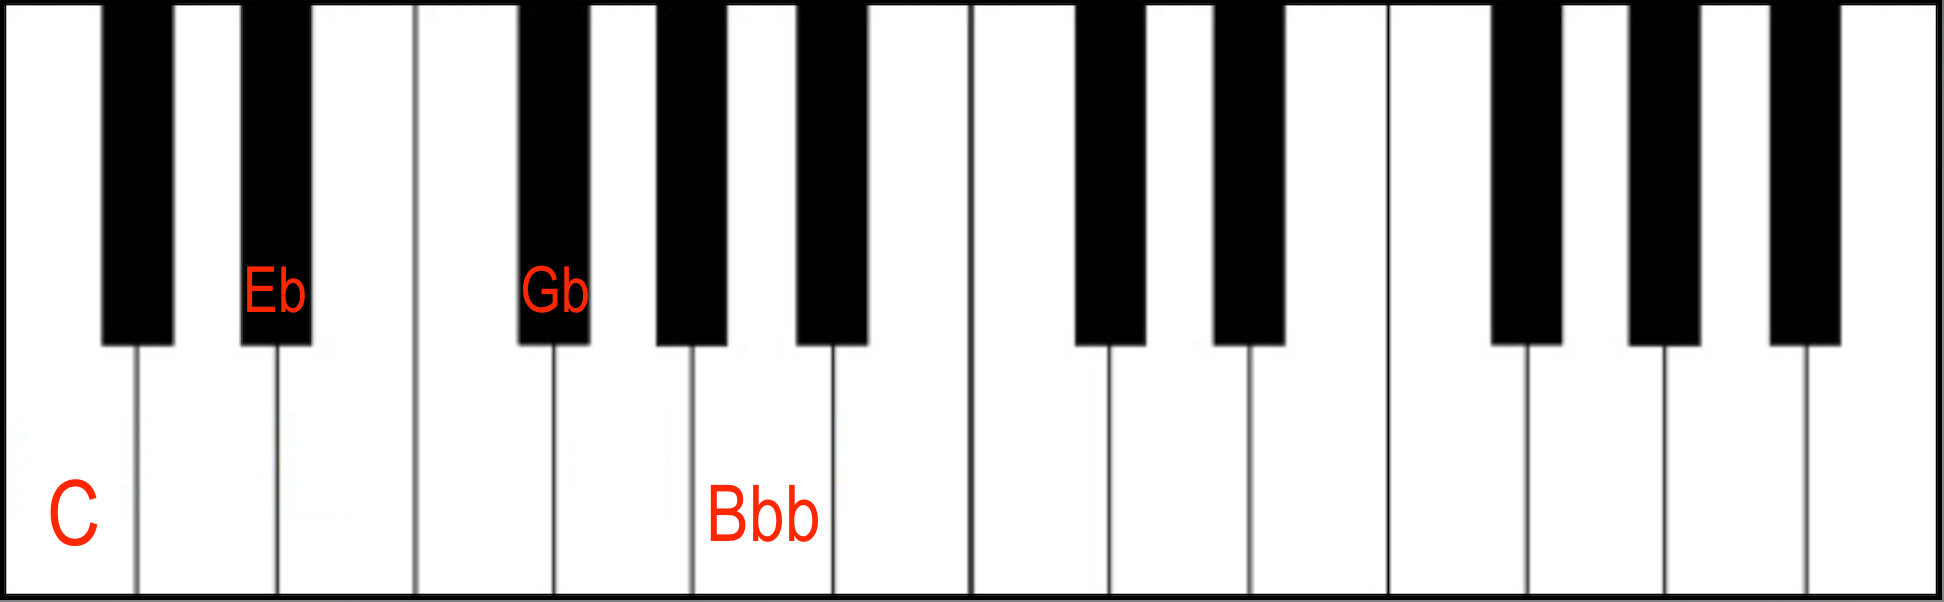 Piano Jazz Chords: Fully diminished 7th chord